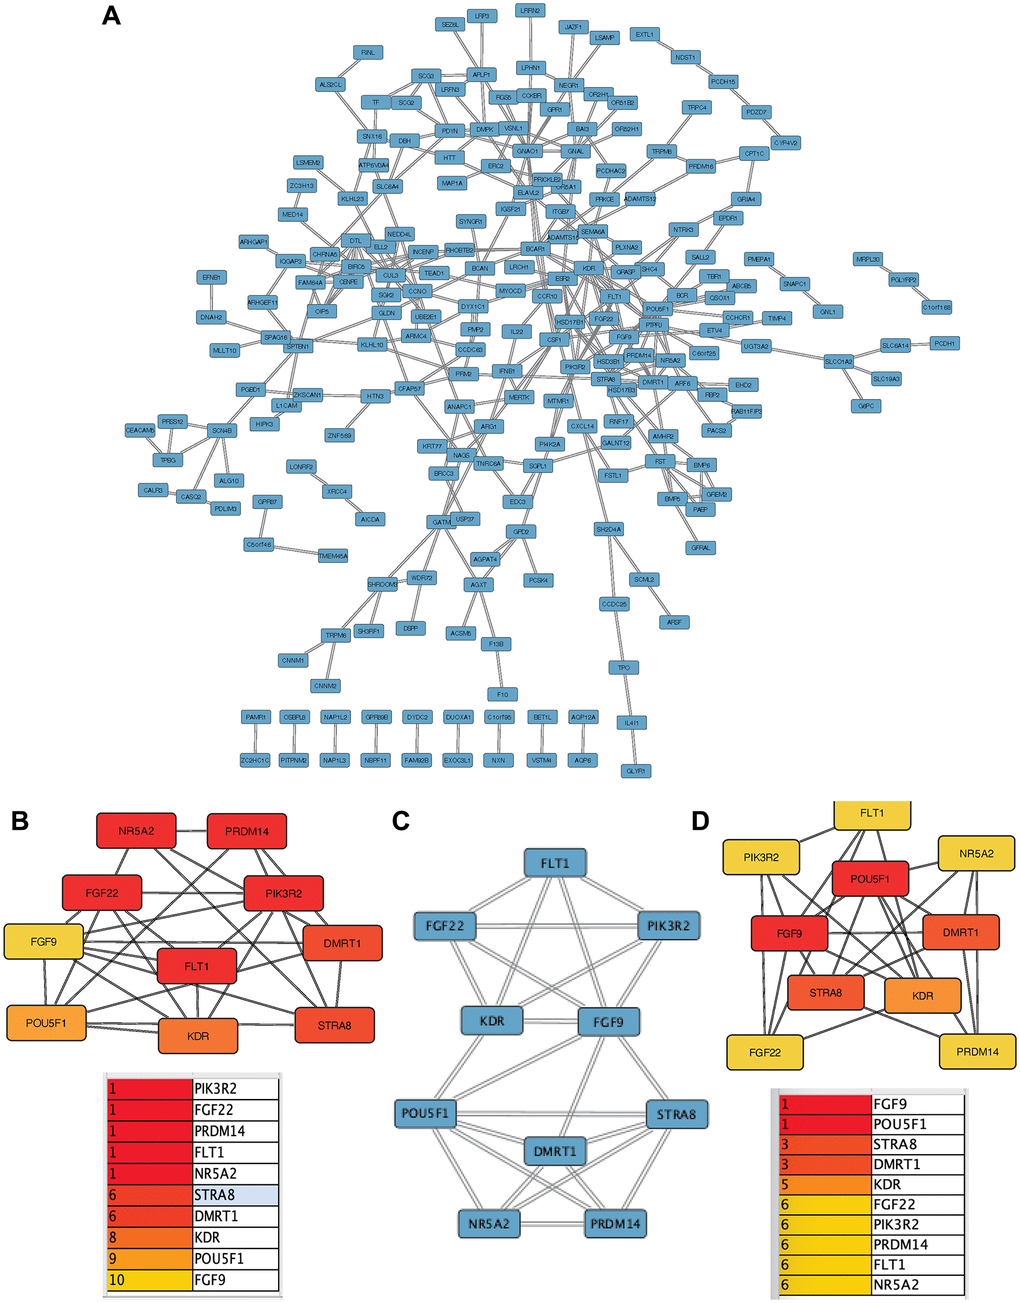 Construction and analysis of protein-protein interaction (PPI) network. (A) PPI network of DEGs. (B) MCC algorithm. (C) MCODE calculates the core module. (D) DMNC algorithm.